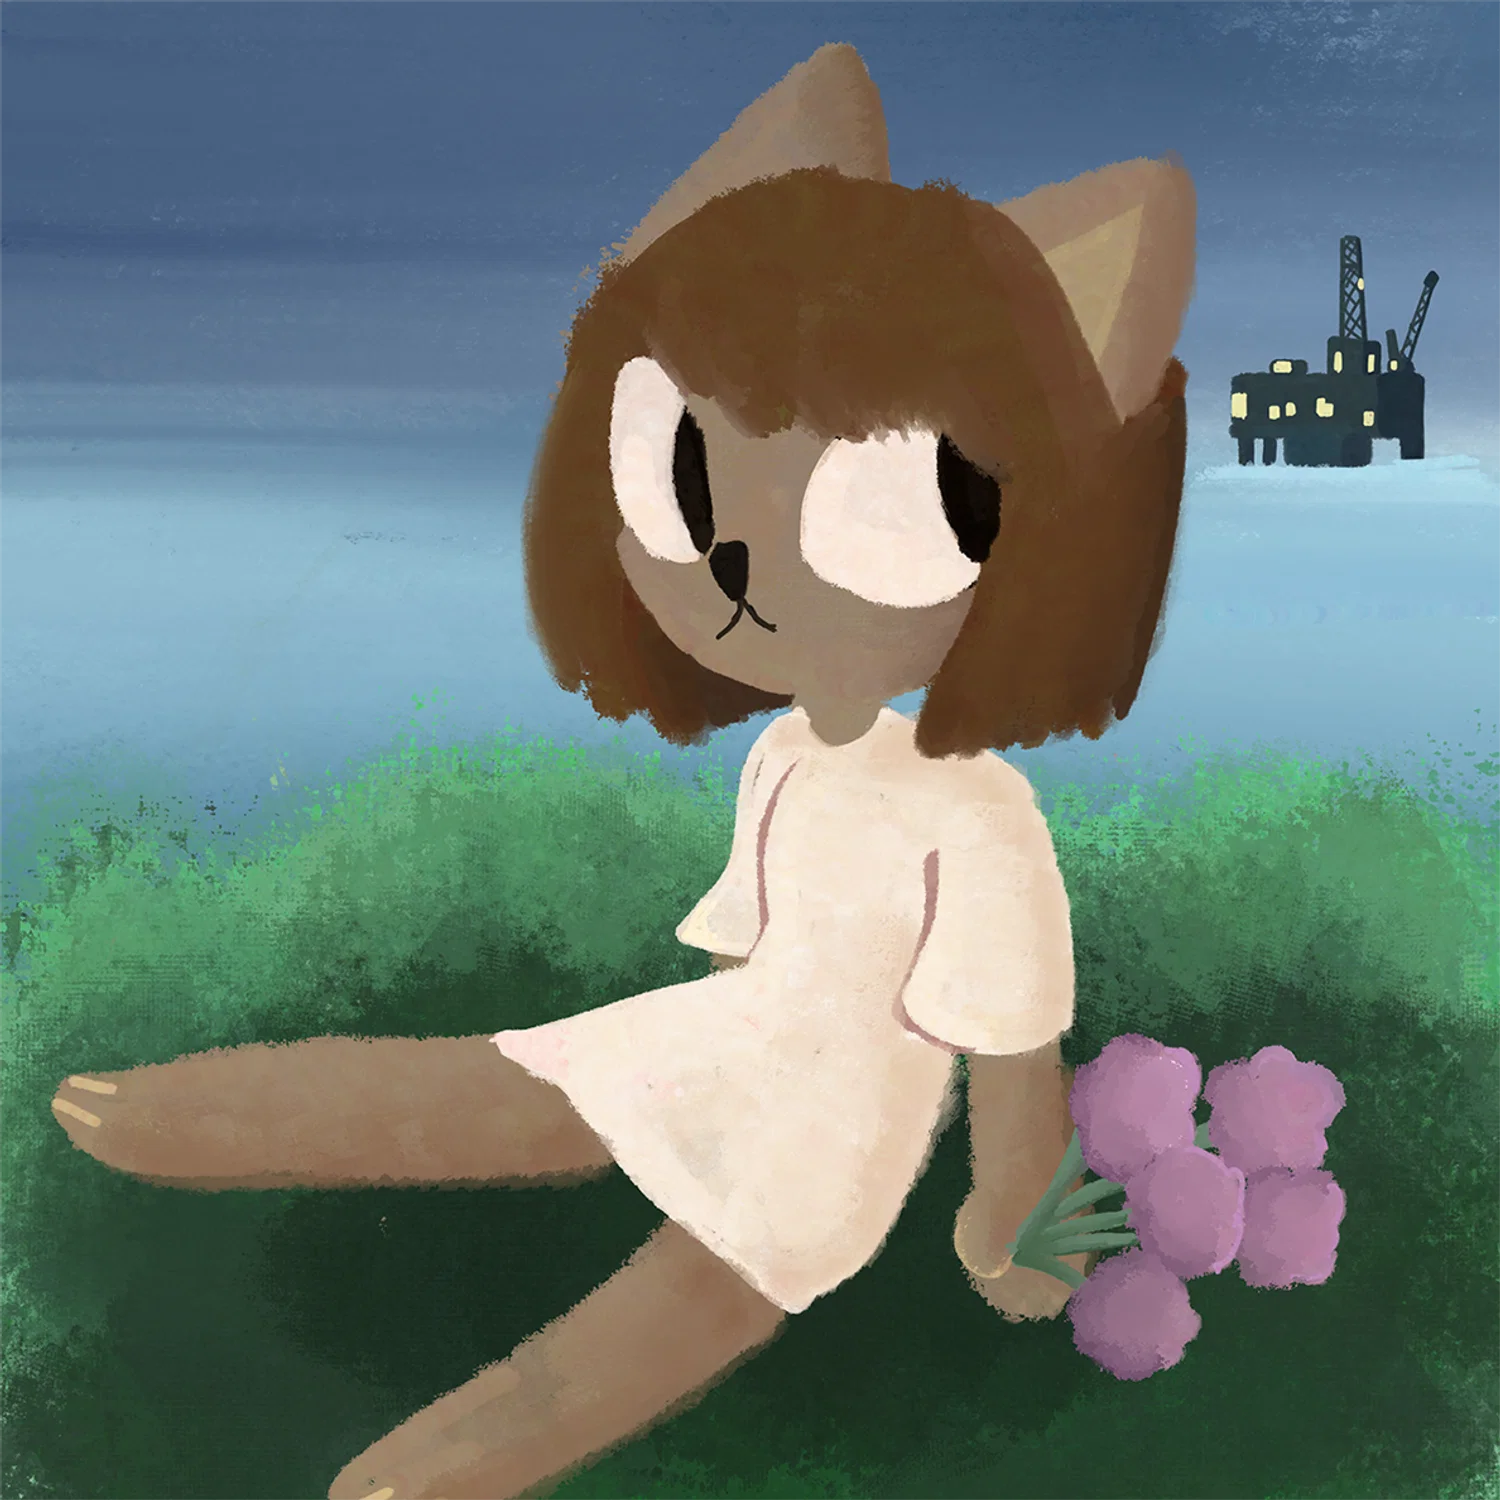 A anthro cat thing sitting in the center of painting holding flowers on some grass while they look to the side of them. In the background there is water and an oil rig. 